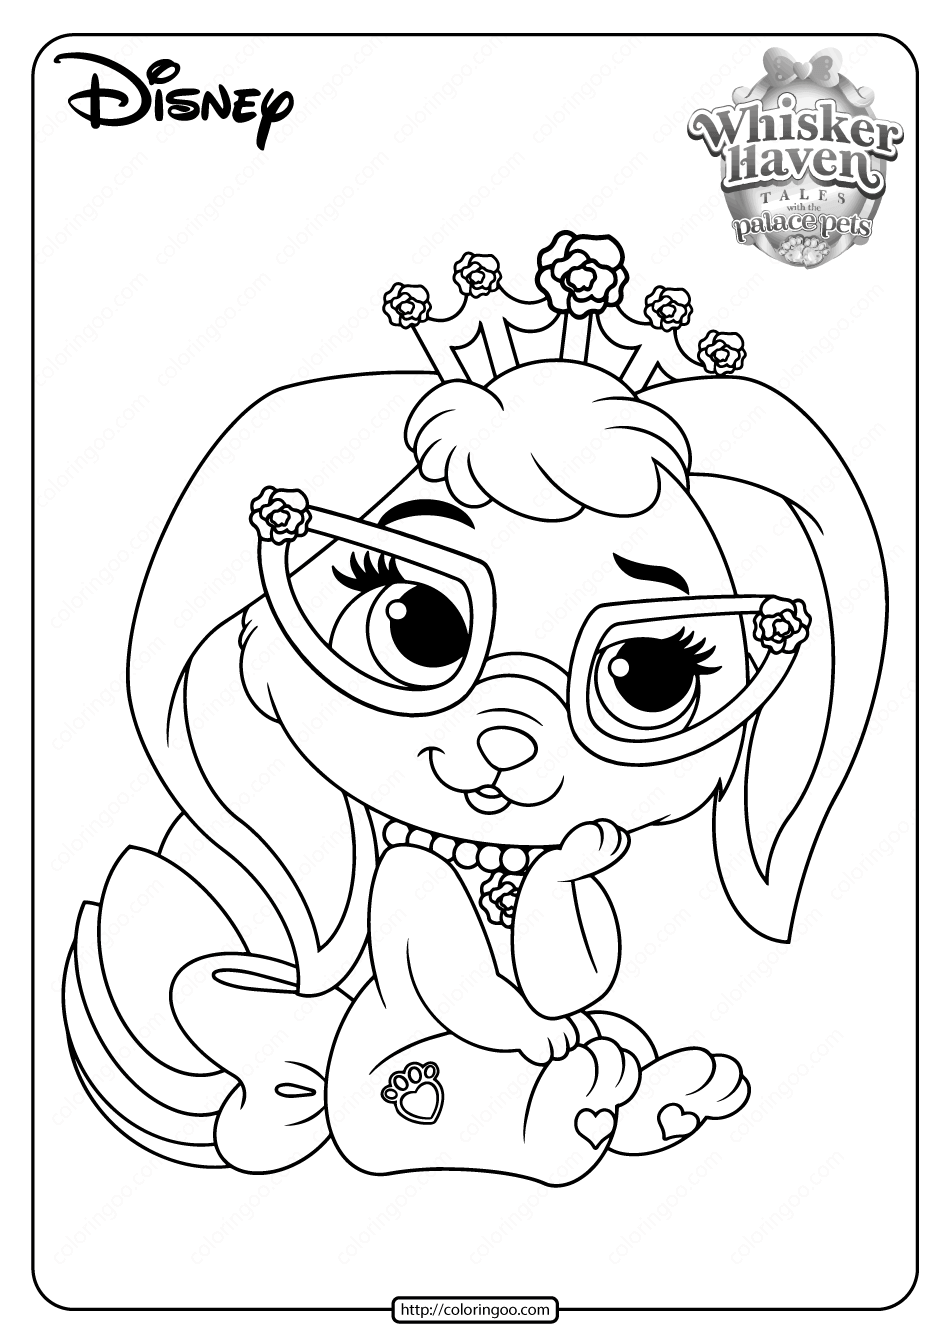 printable palace pets booksy pdf coloring pages